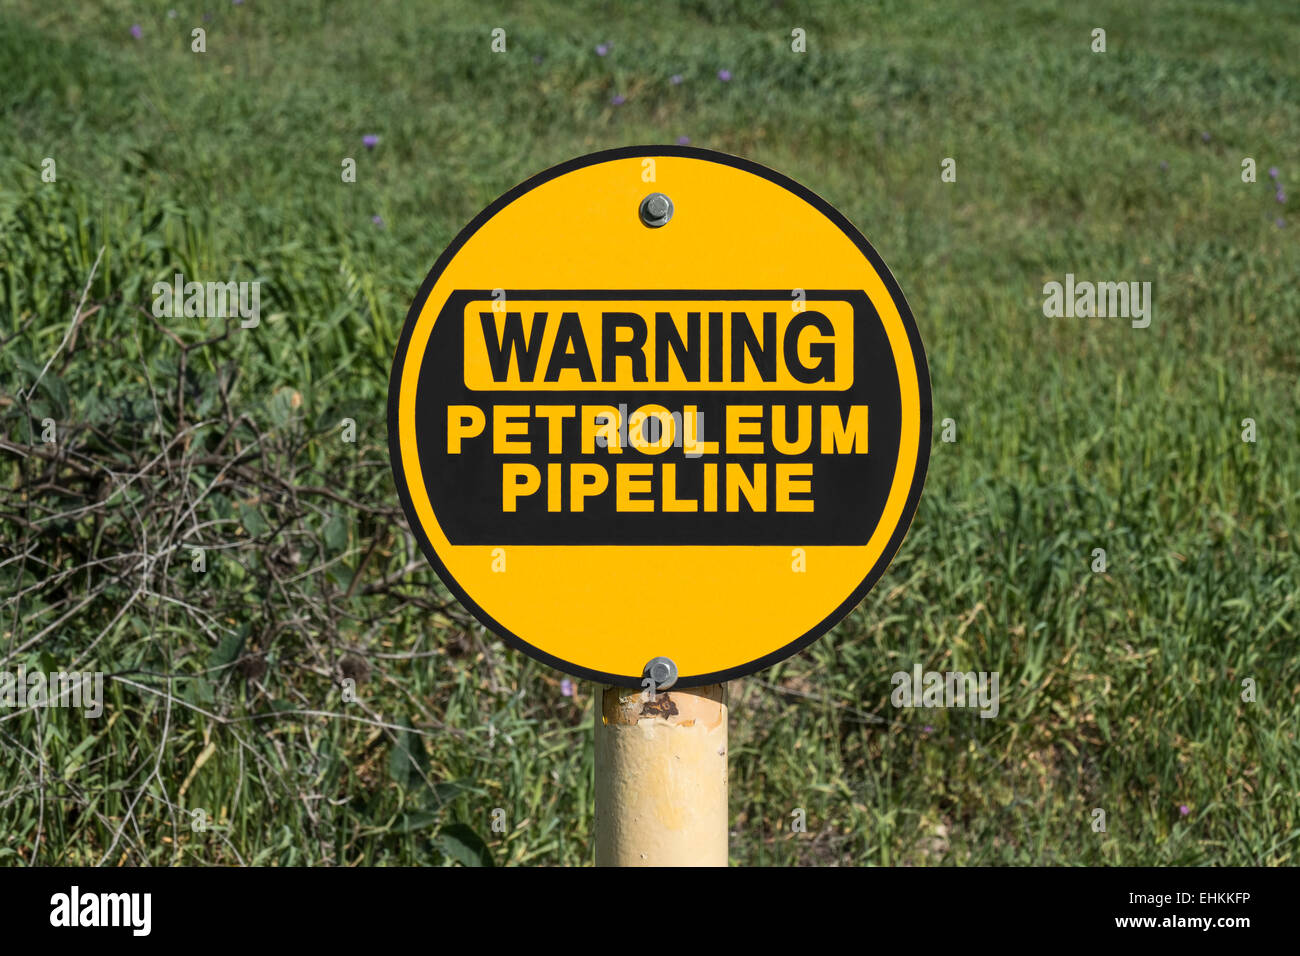 Petroleum pipeline warning sign in green grassy meadow. Stock Photo